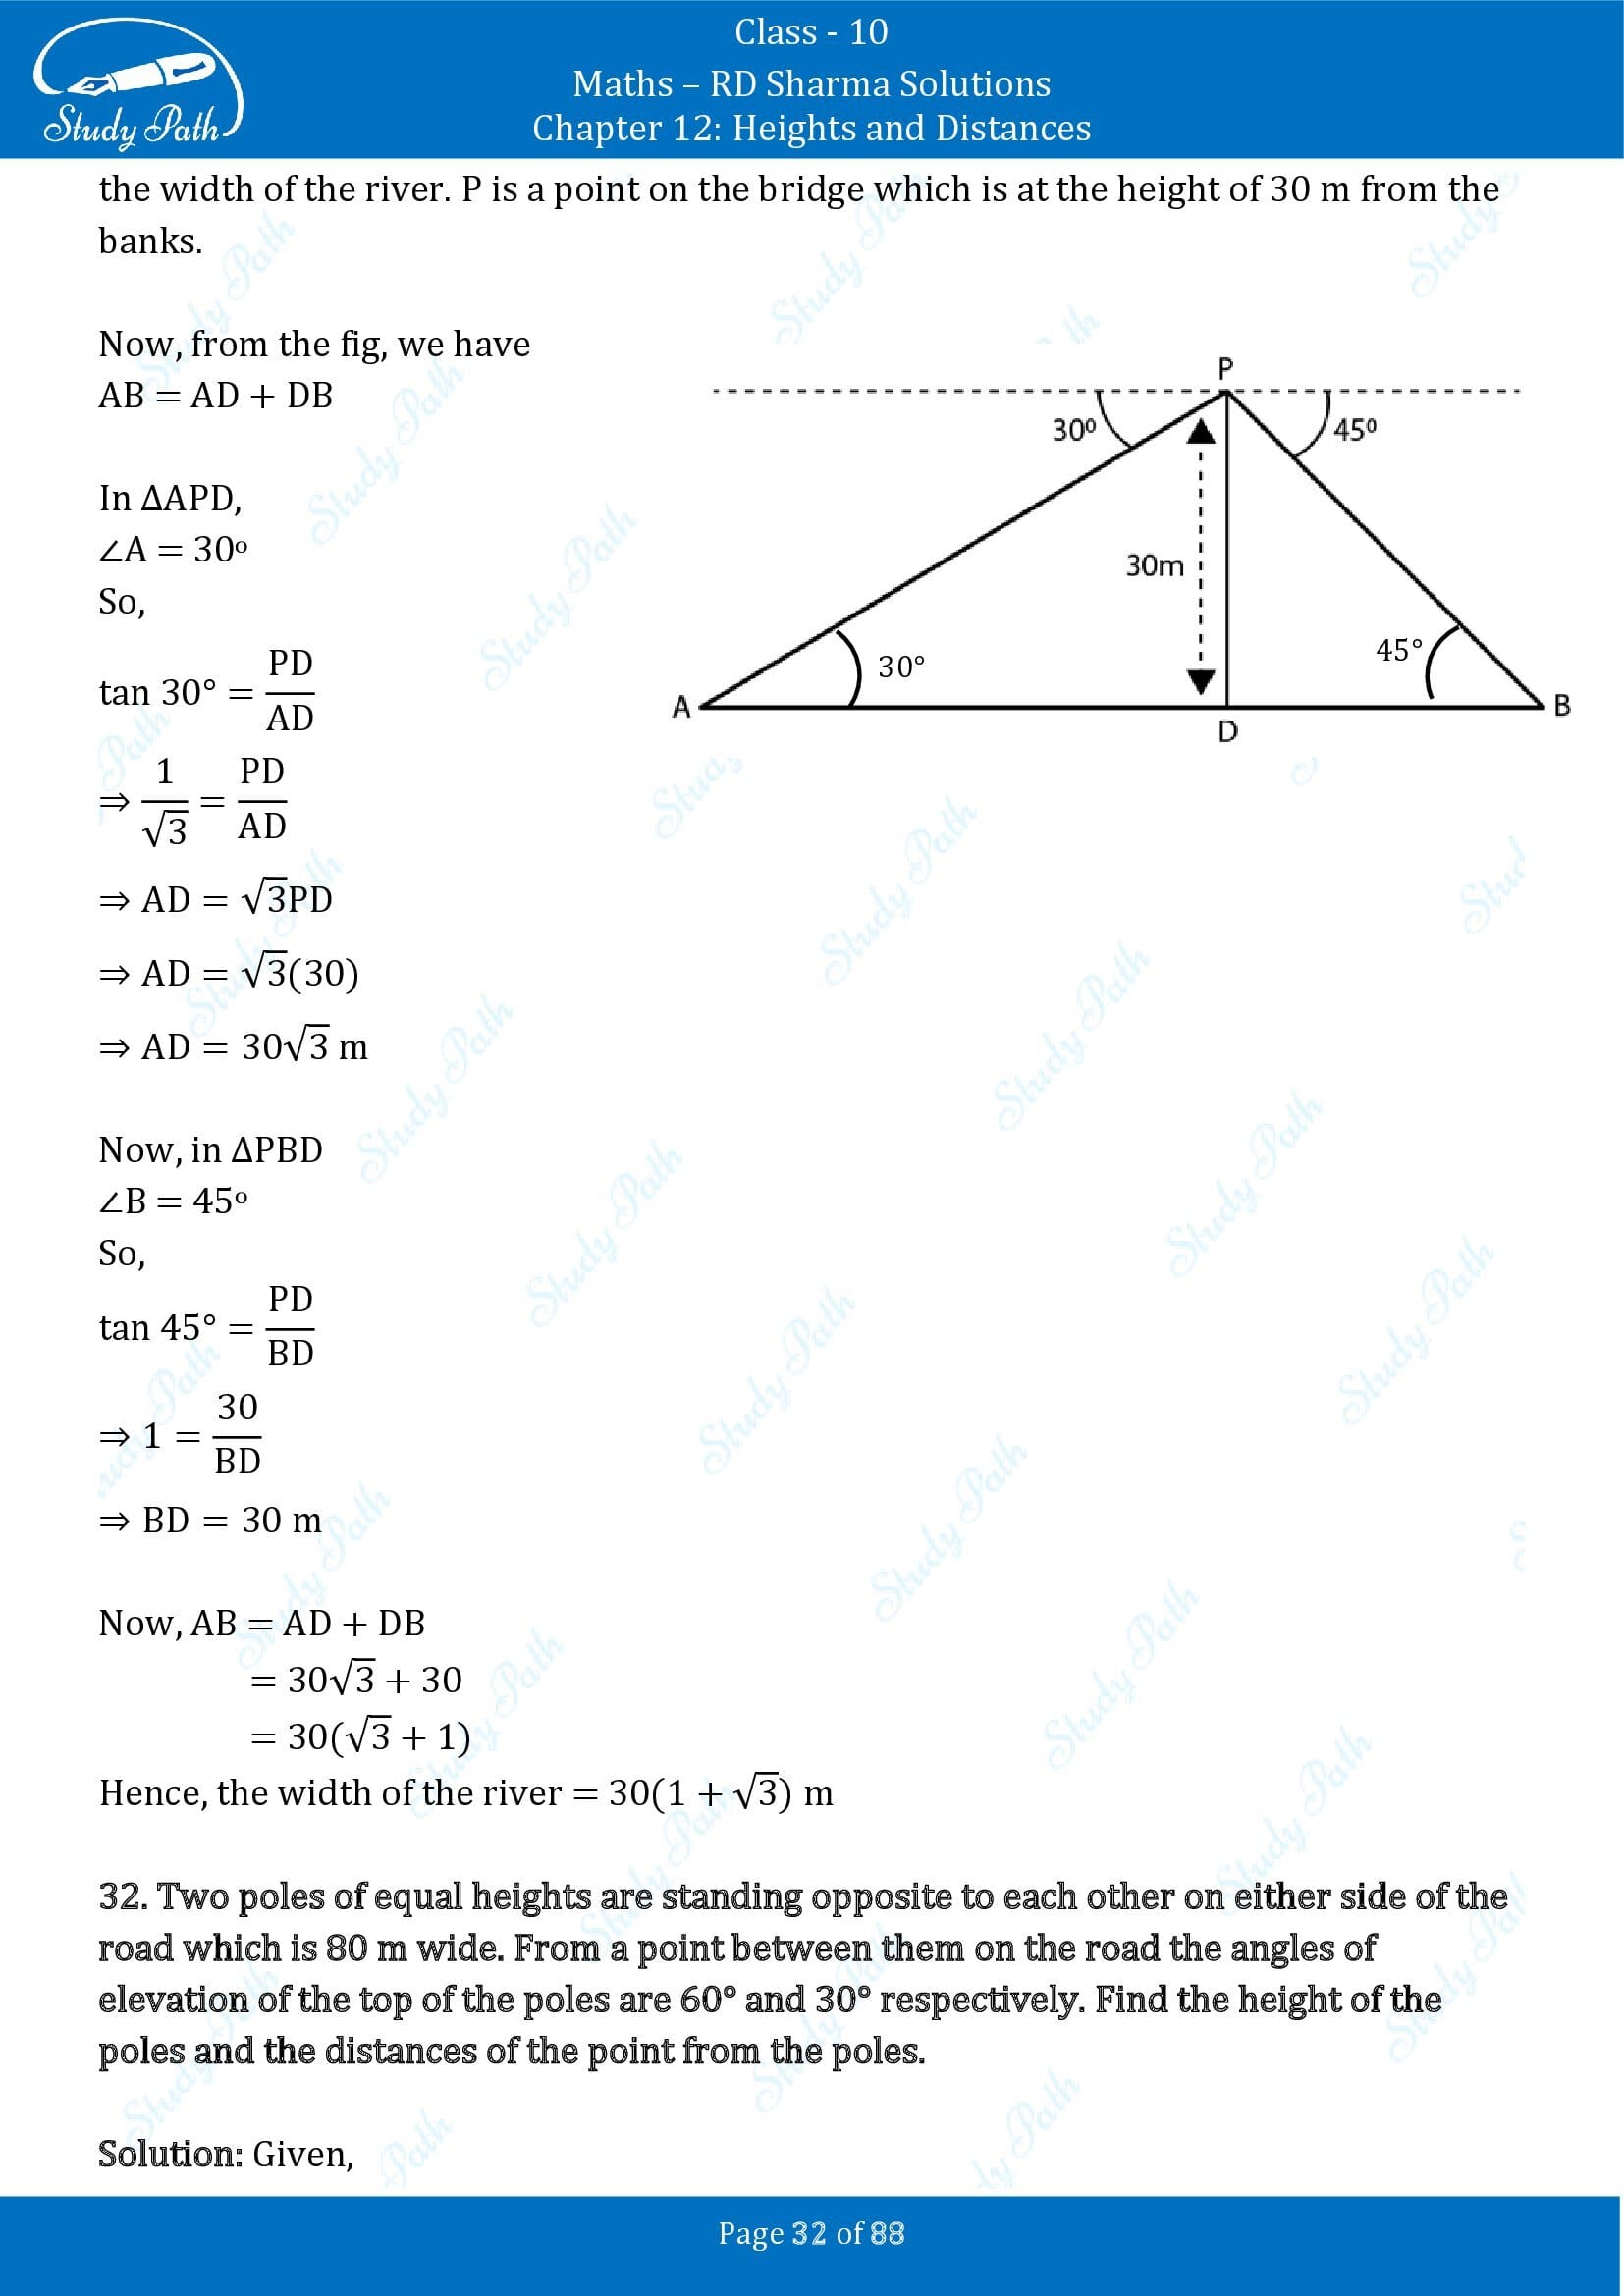 RD Sharma Solutions Class 10 Chapter 12 Heights and Distances Exercise 12.1 00032